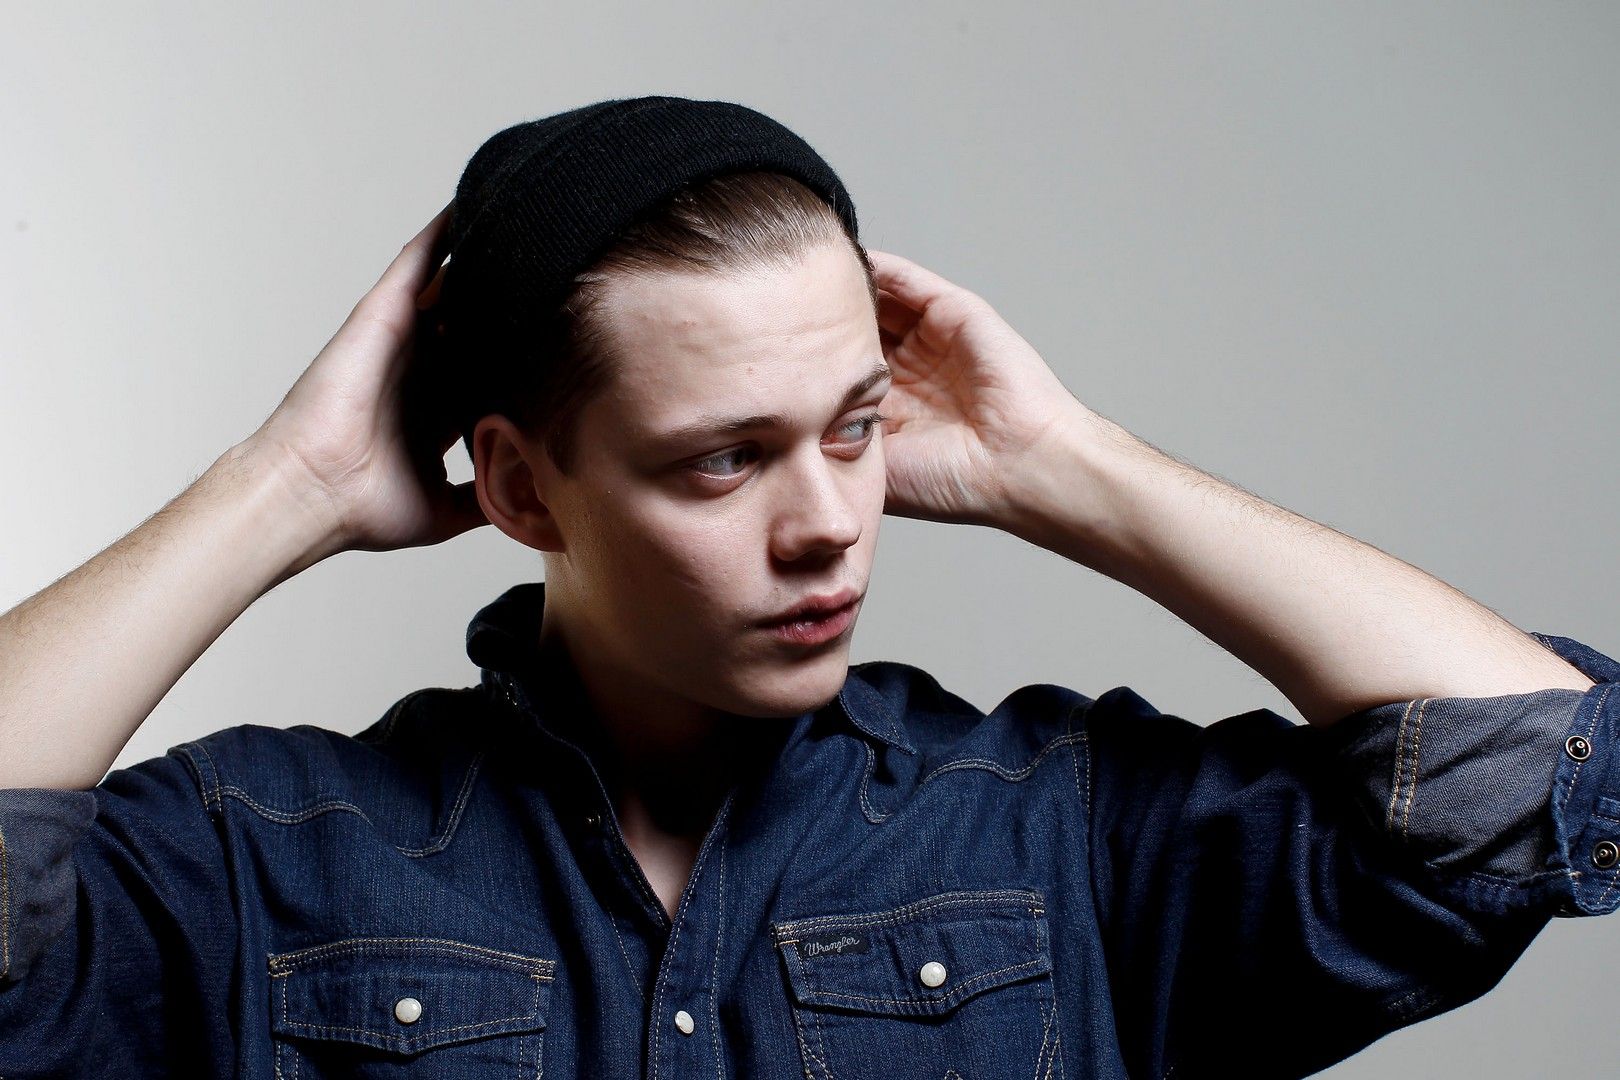 Bill Skarsgard OFFICIALLY Cast As Pennywise The Dancing Clown